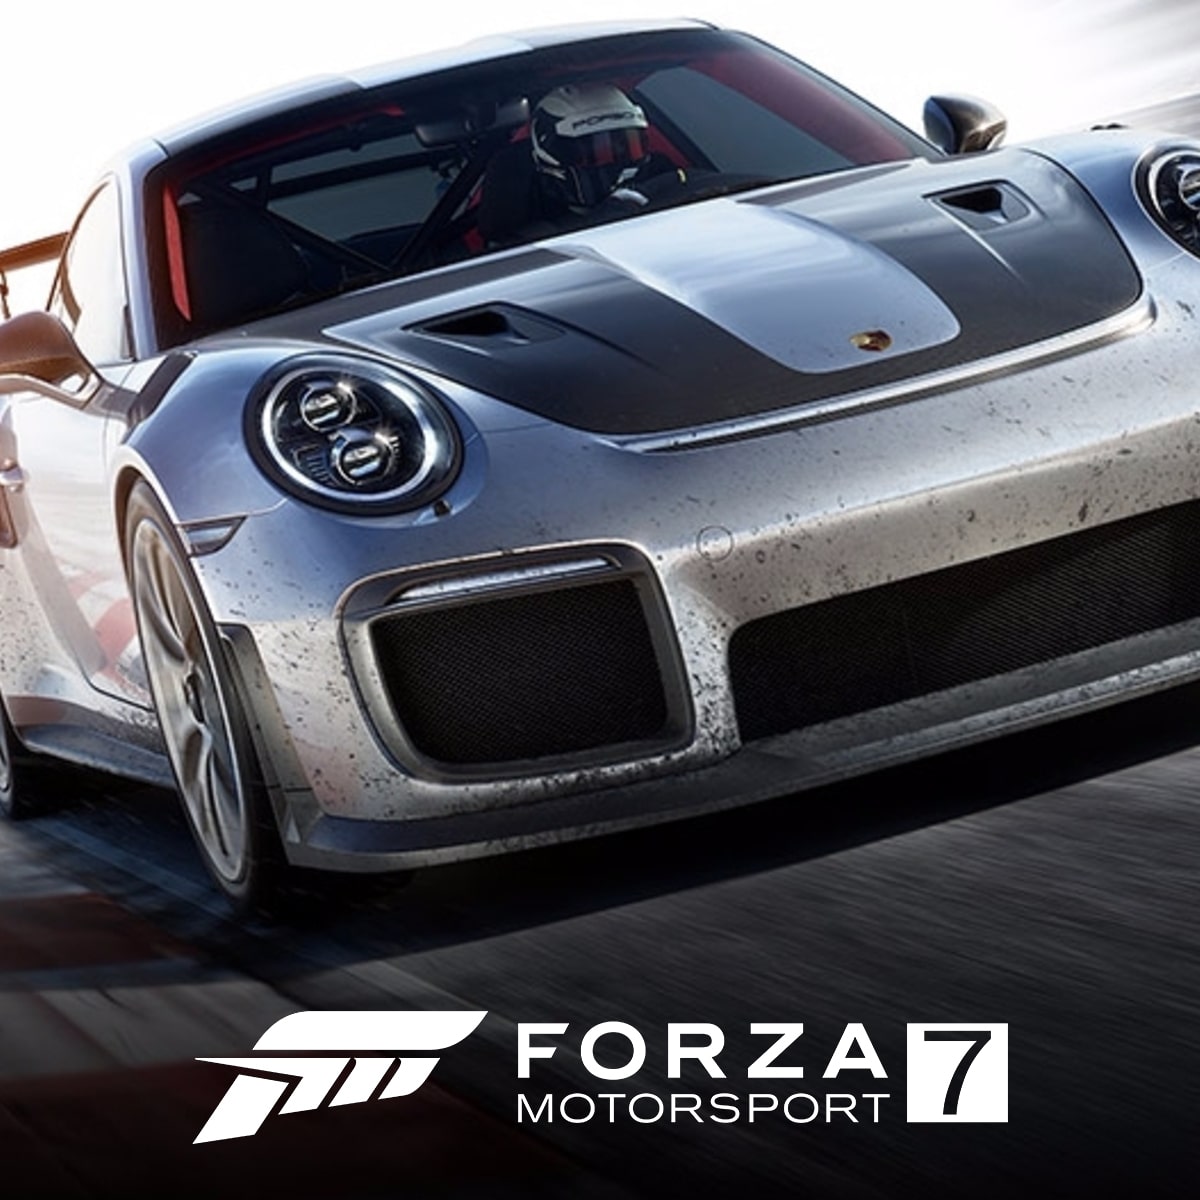 Forza Motorsport PC System Requirements : r/nvidia